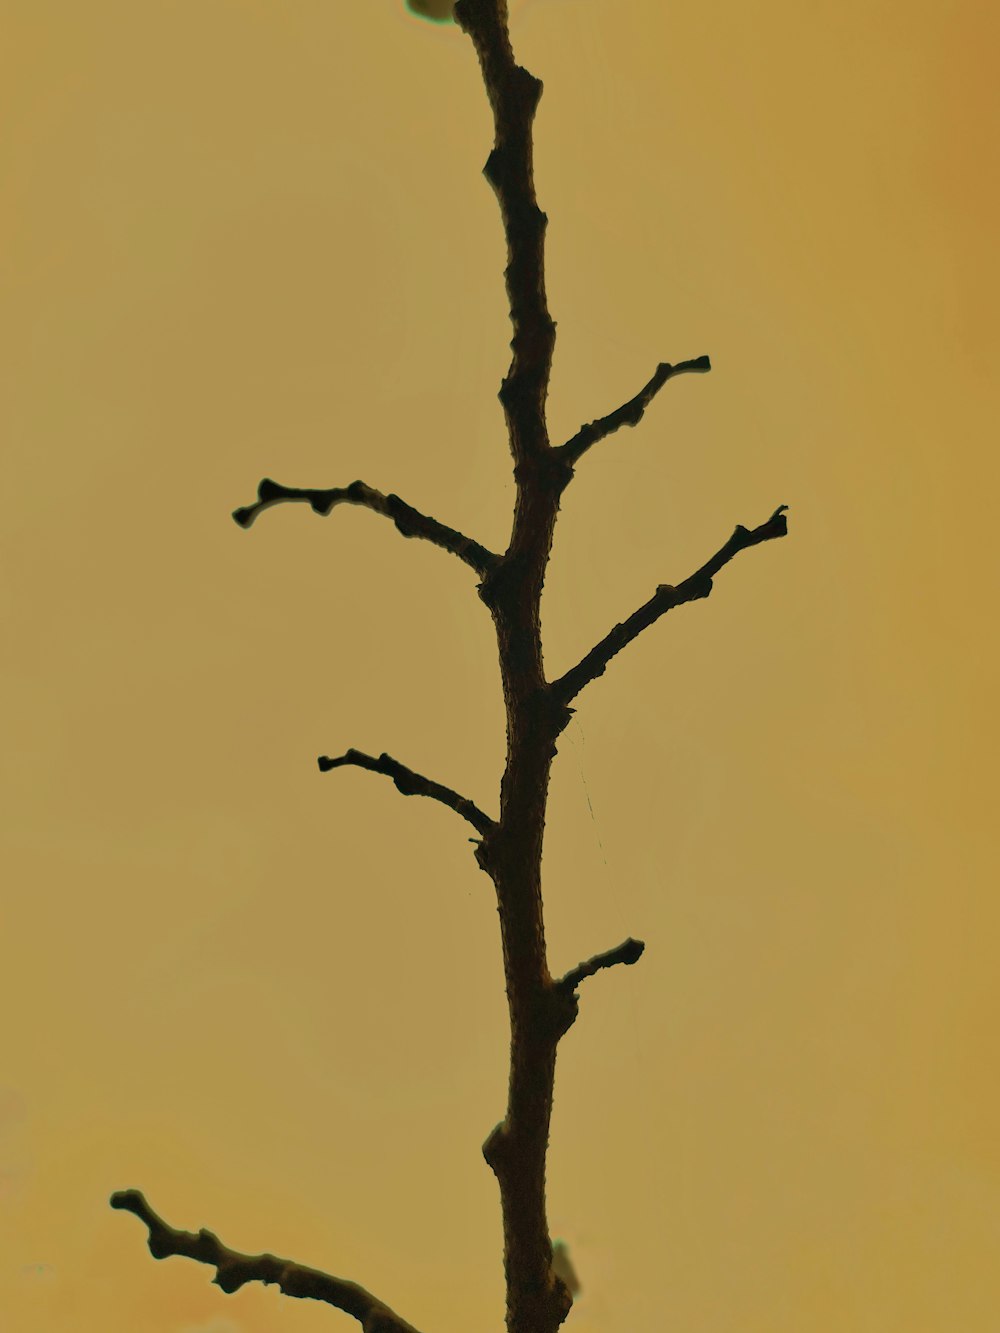 a tree branch with a bird perched on it